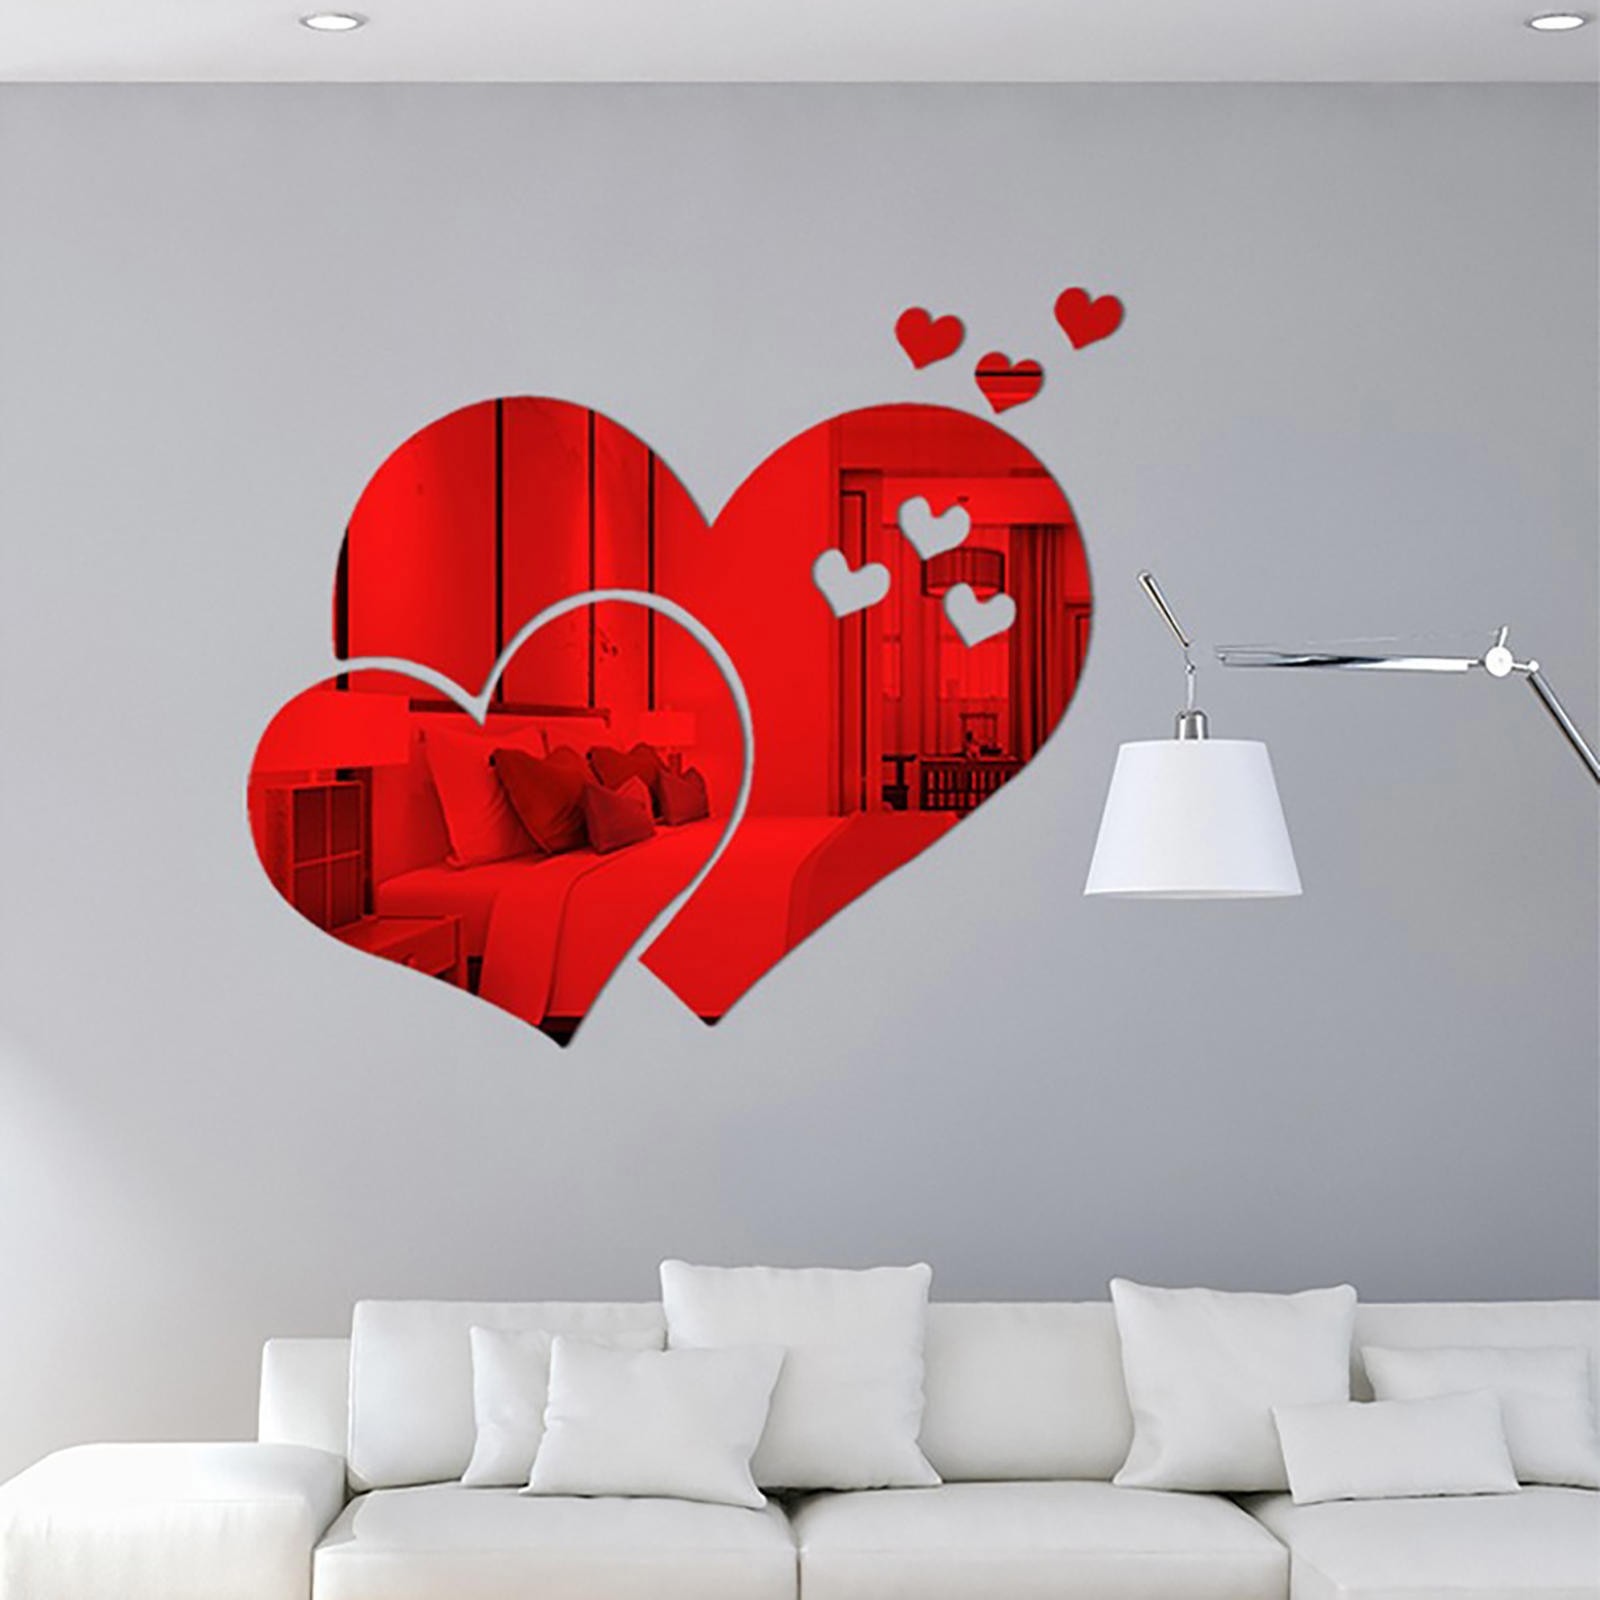 WELL 3d Acrylic Mirror Wall Stickers Mirror Wall Stickers Home Decor